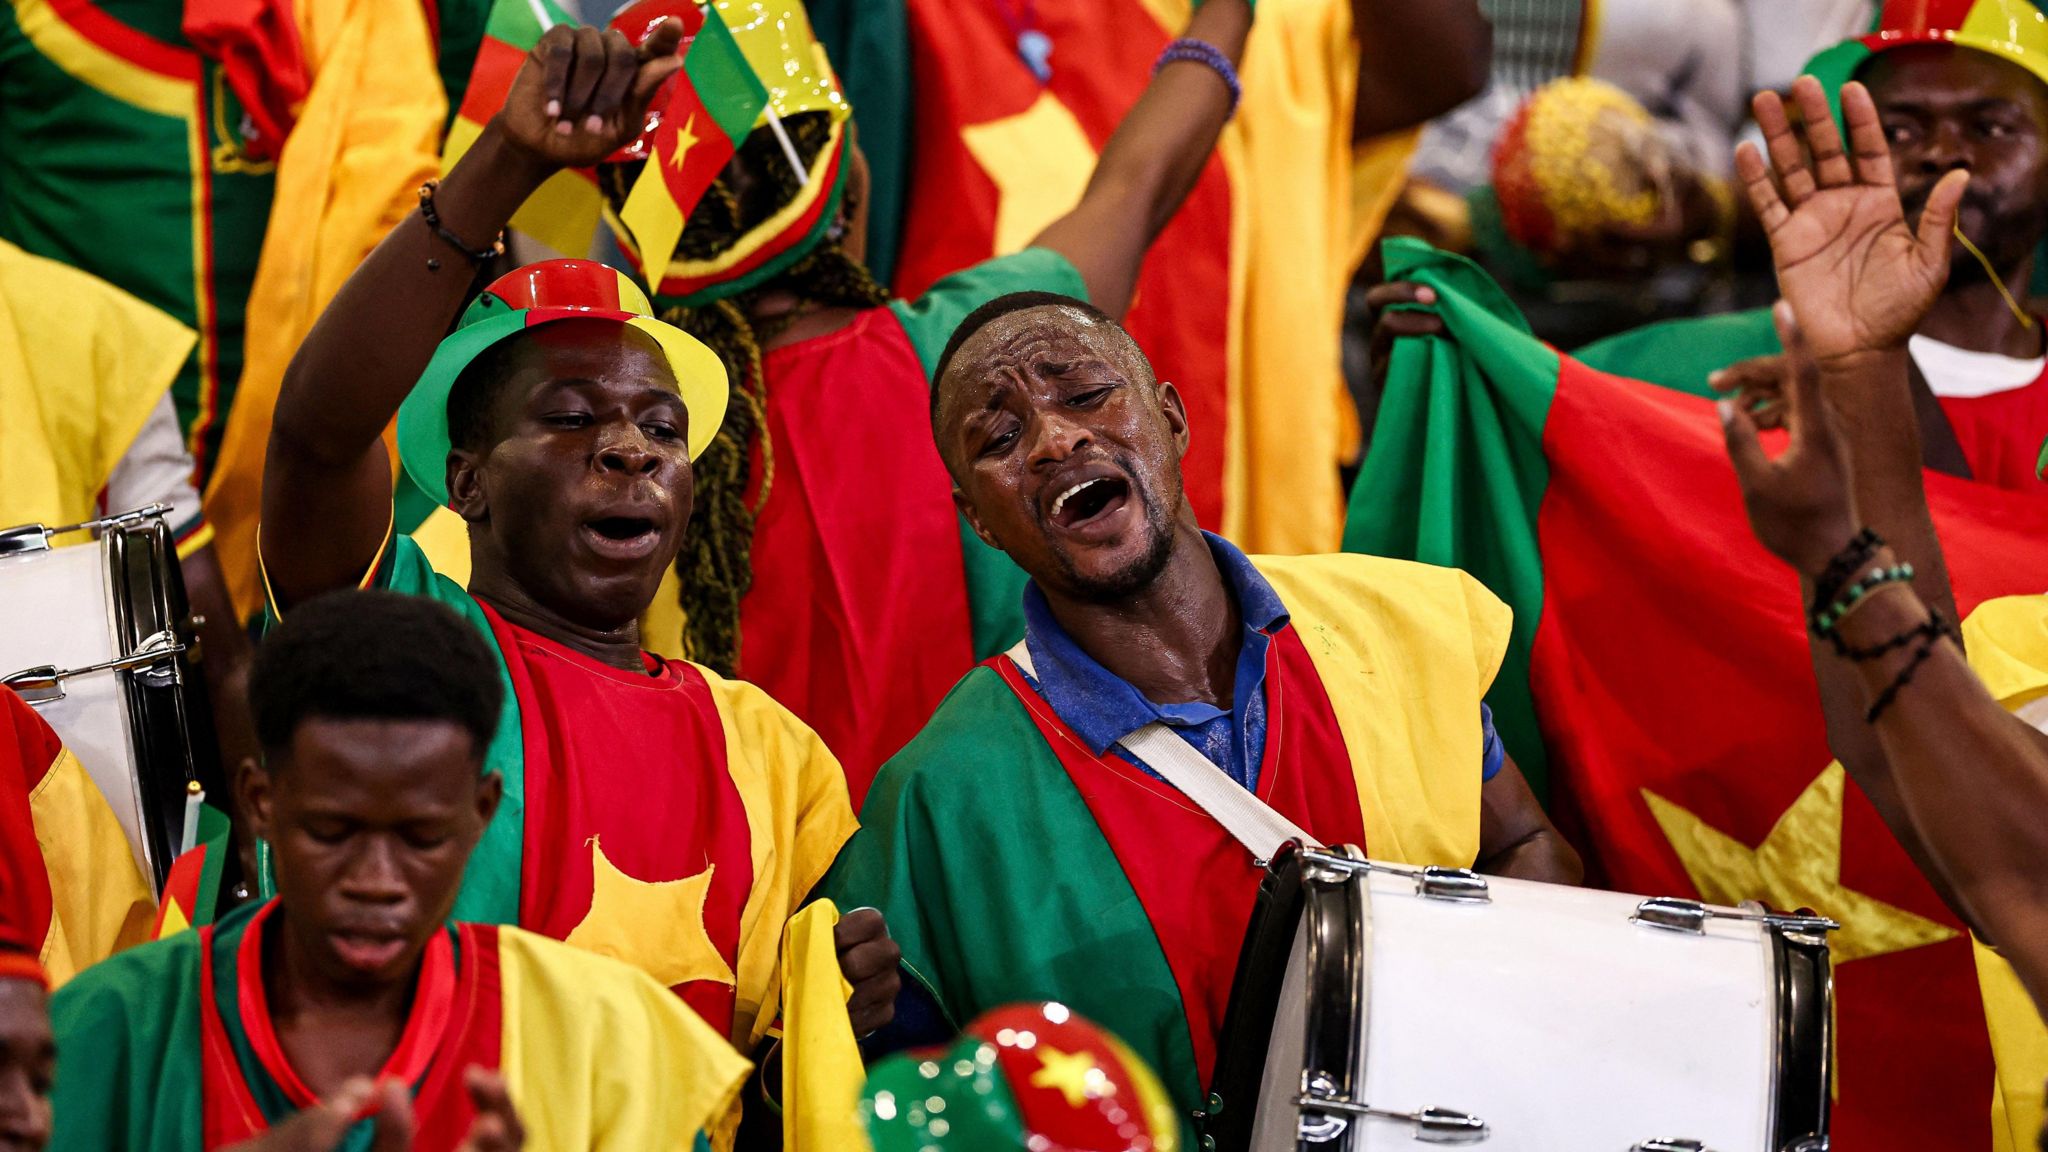 Cameroon fans hold out their hands in the stands of a football stadium